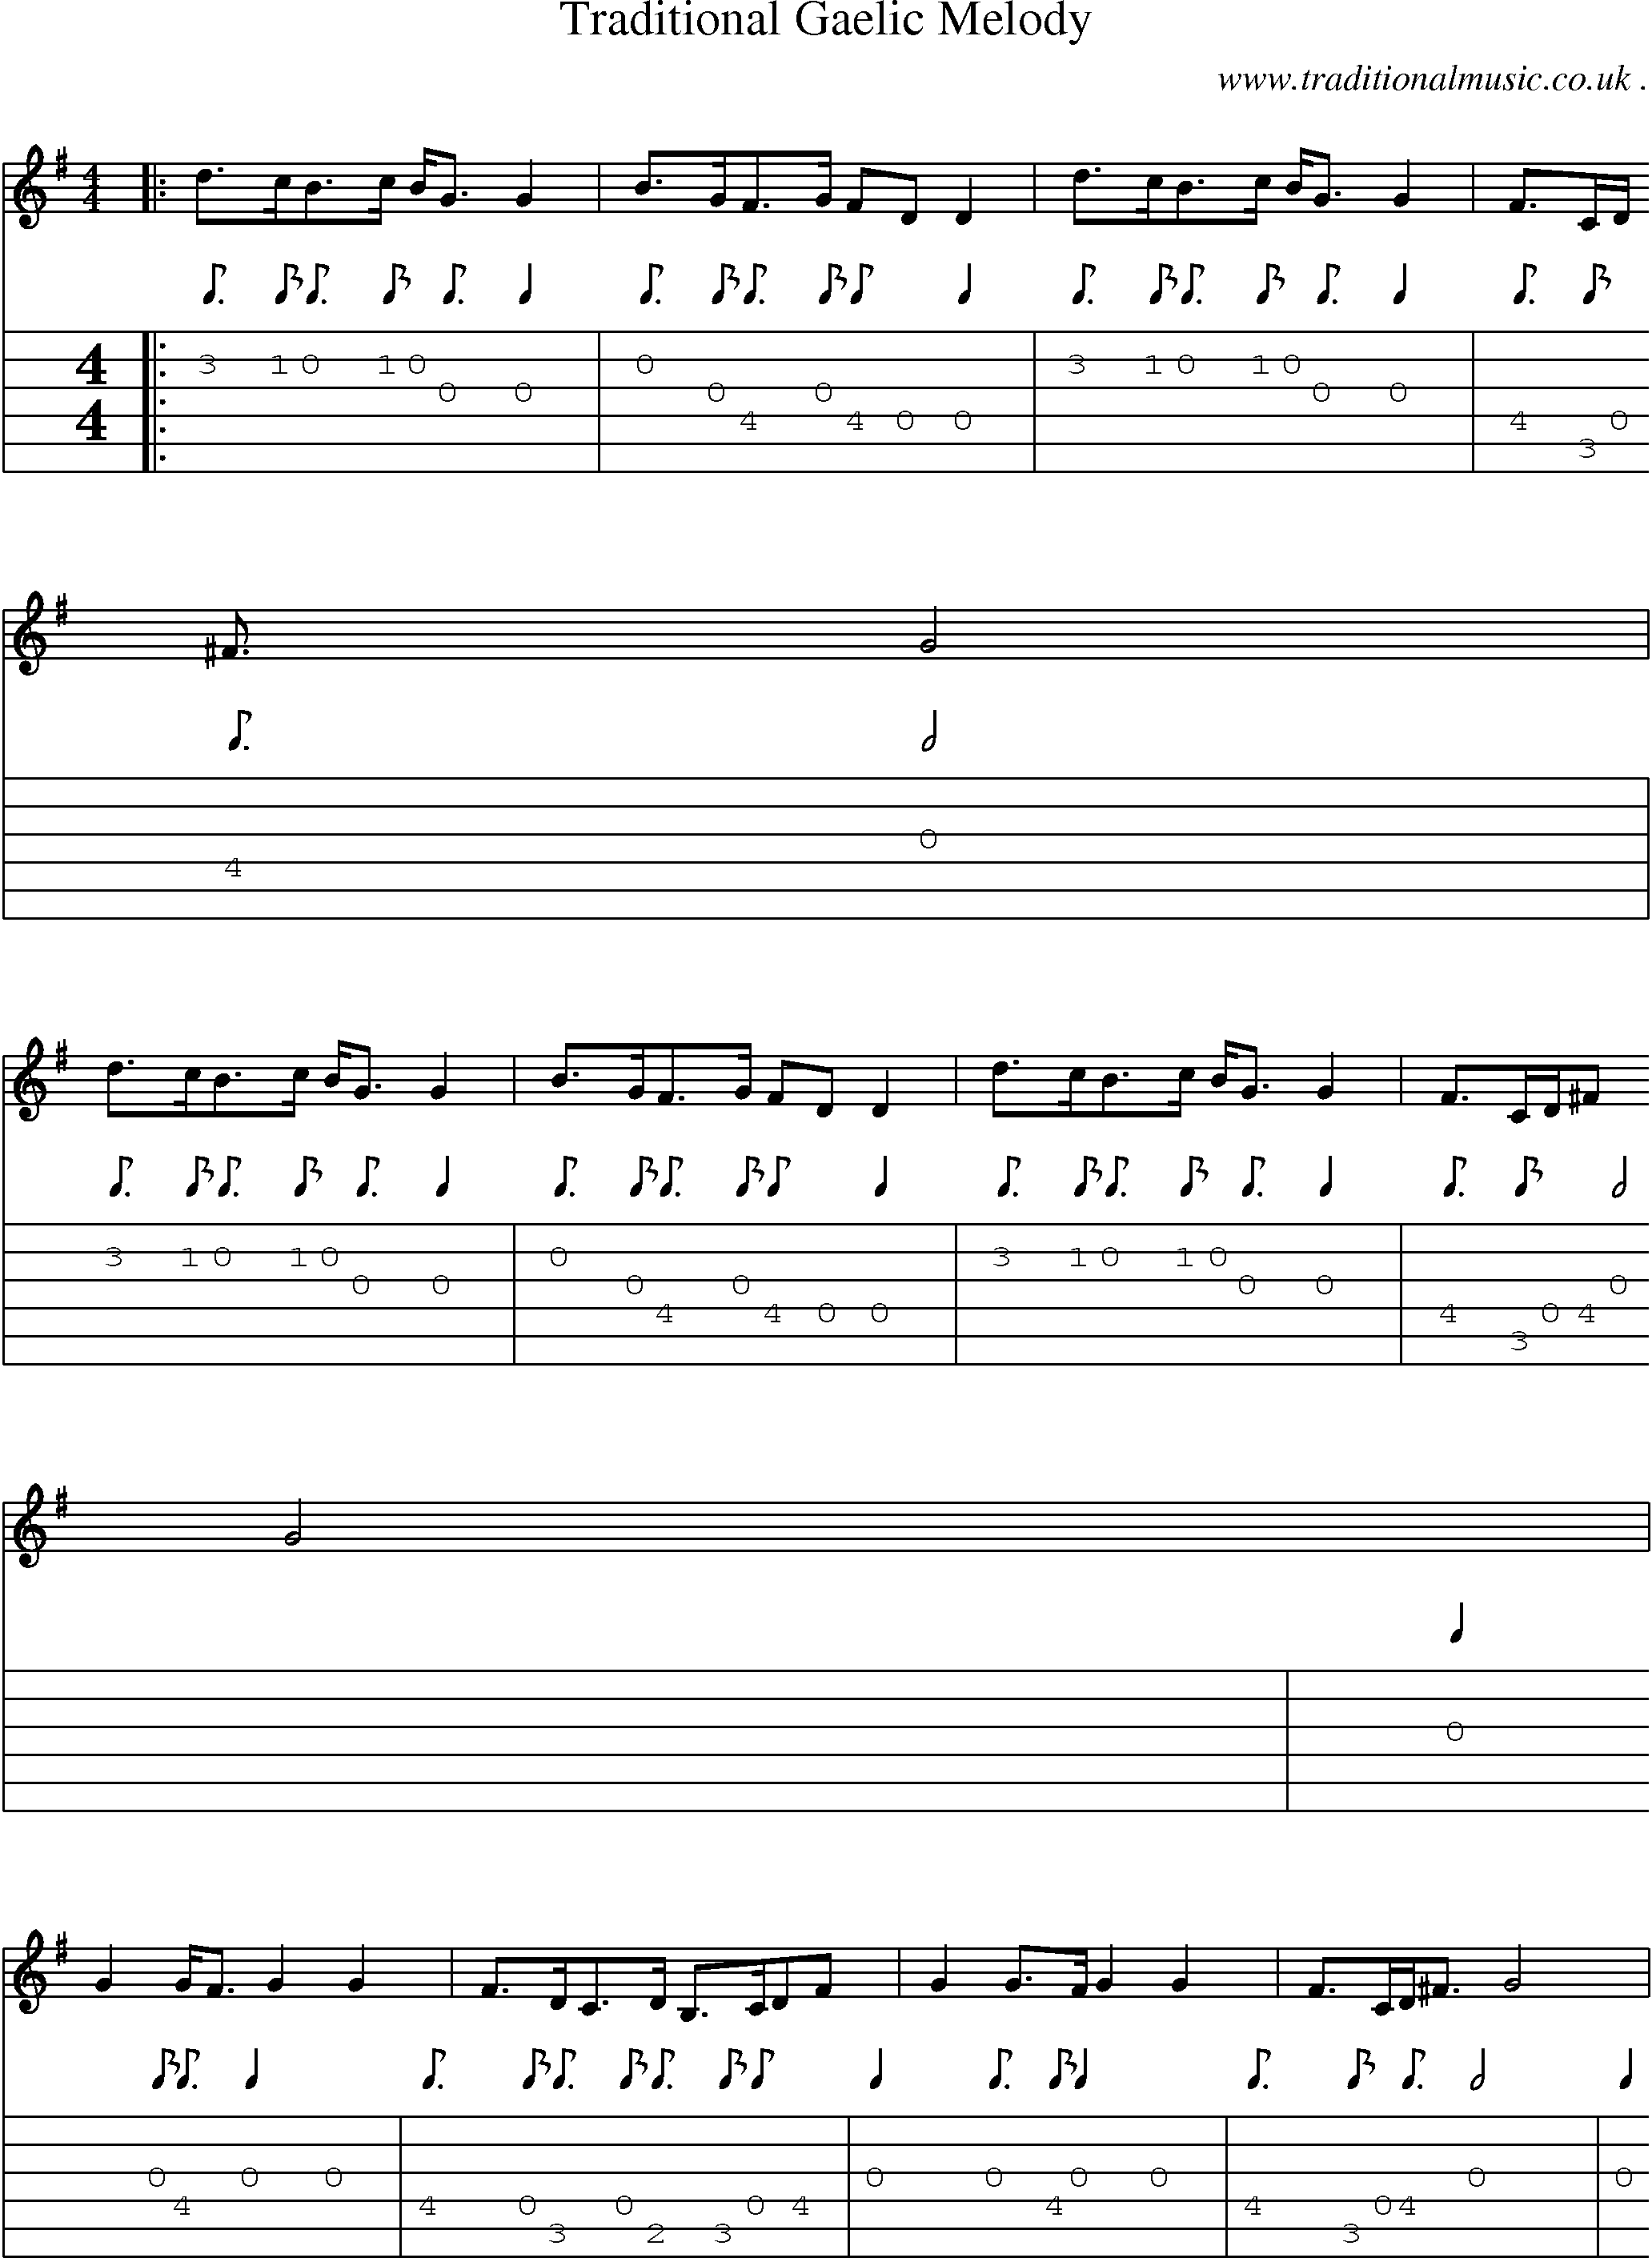 Sheet-Music and Guitar Tabs for Traditional Gaelic Melody